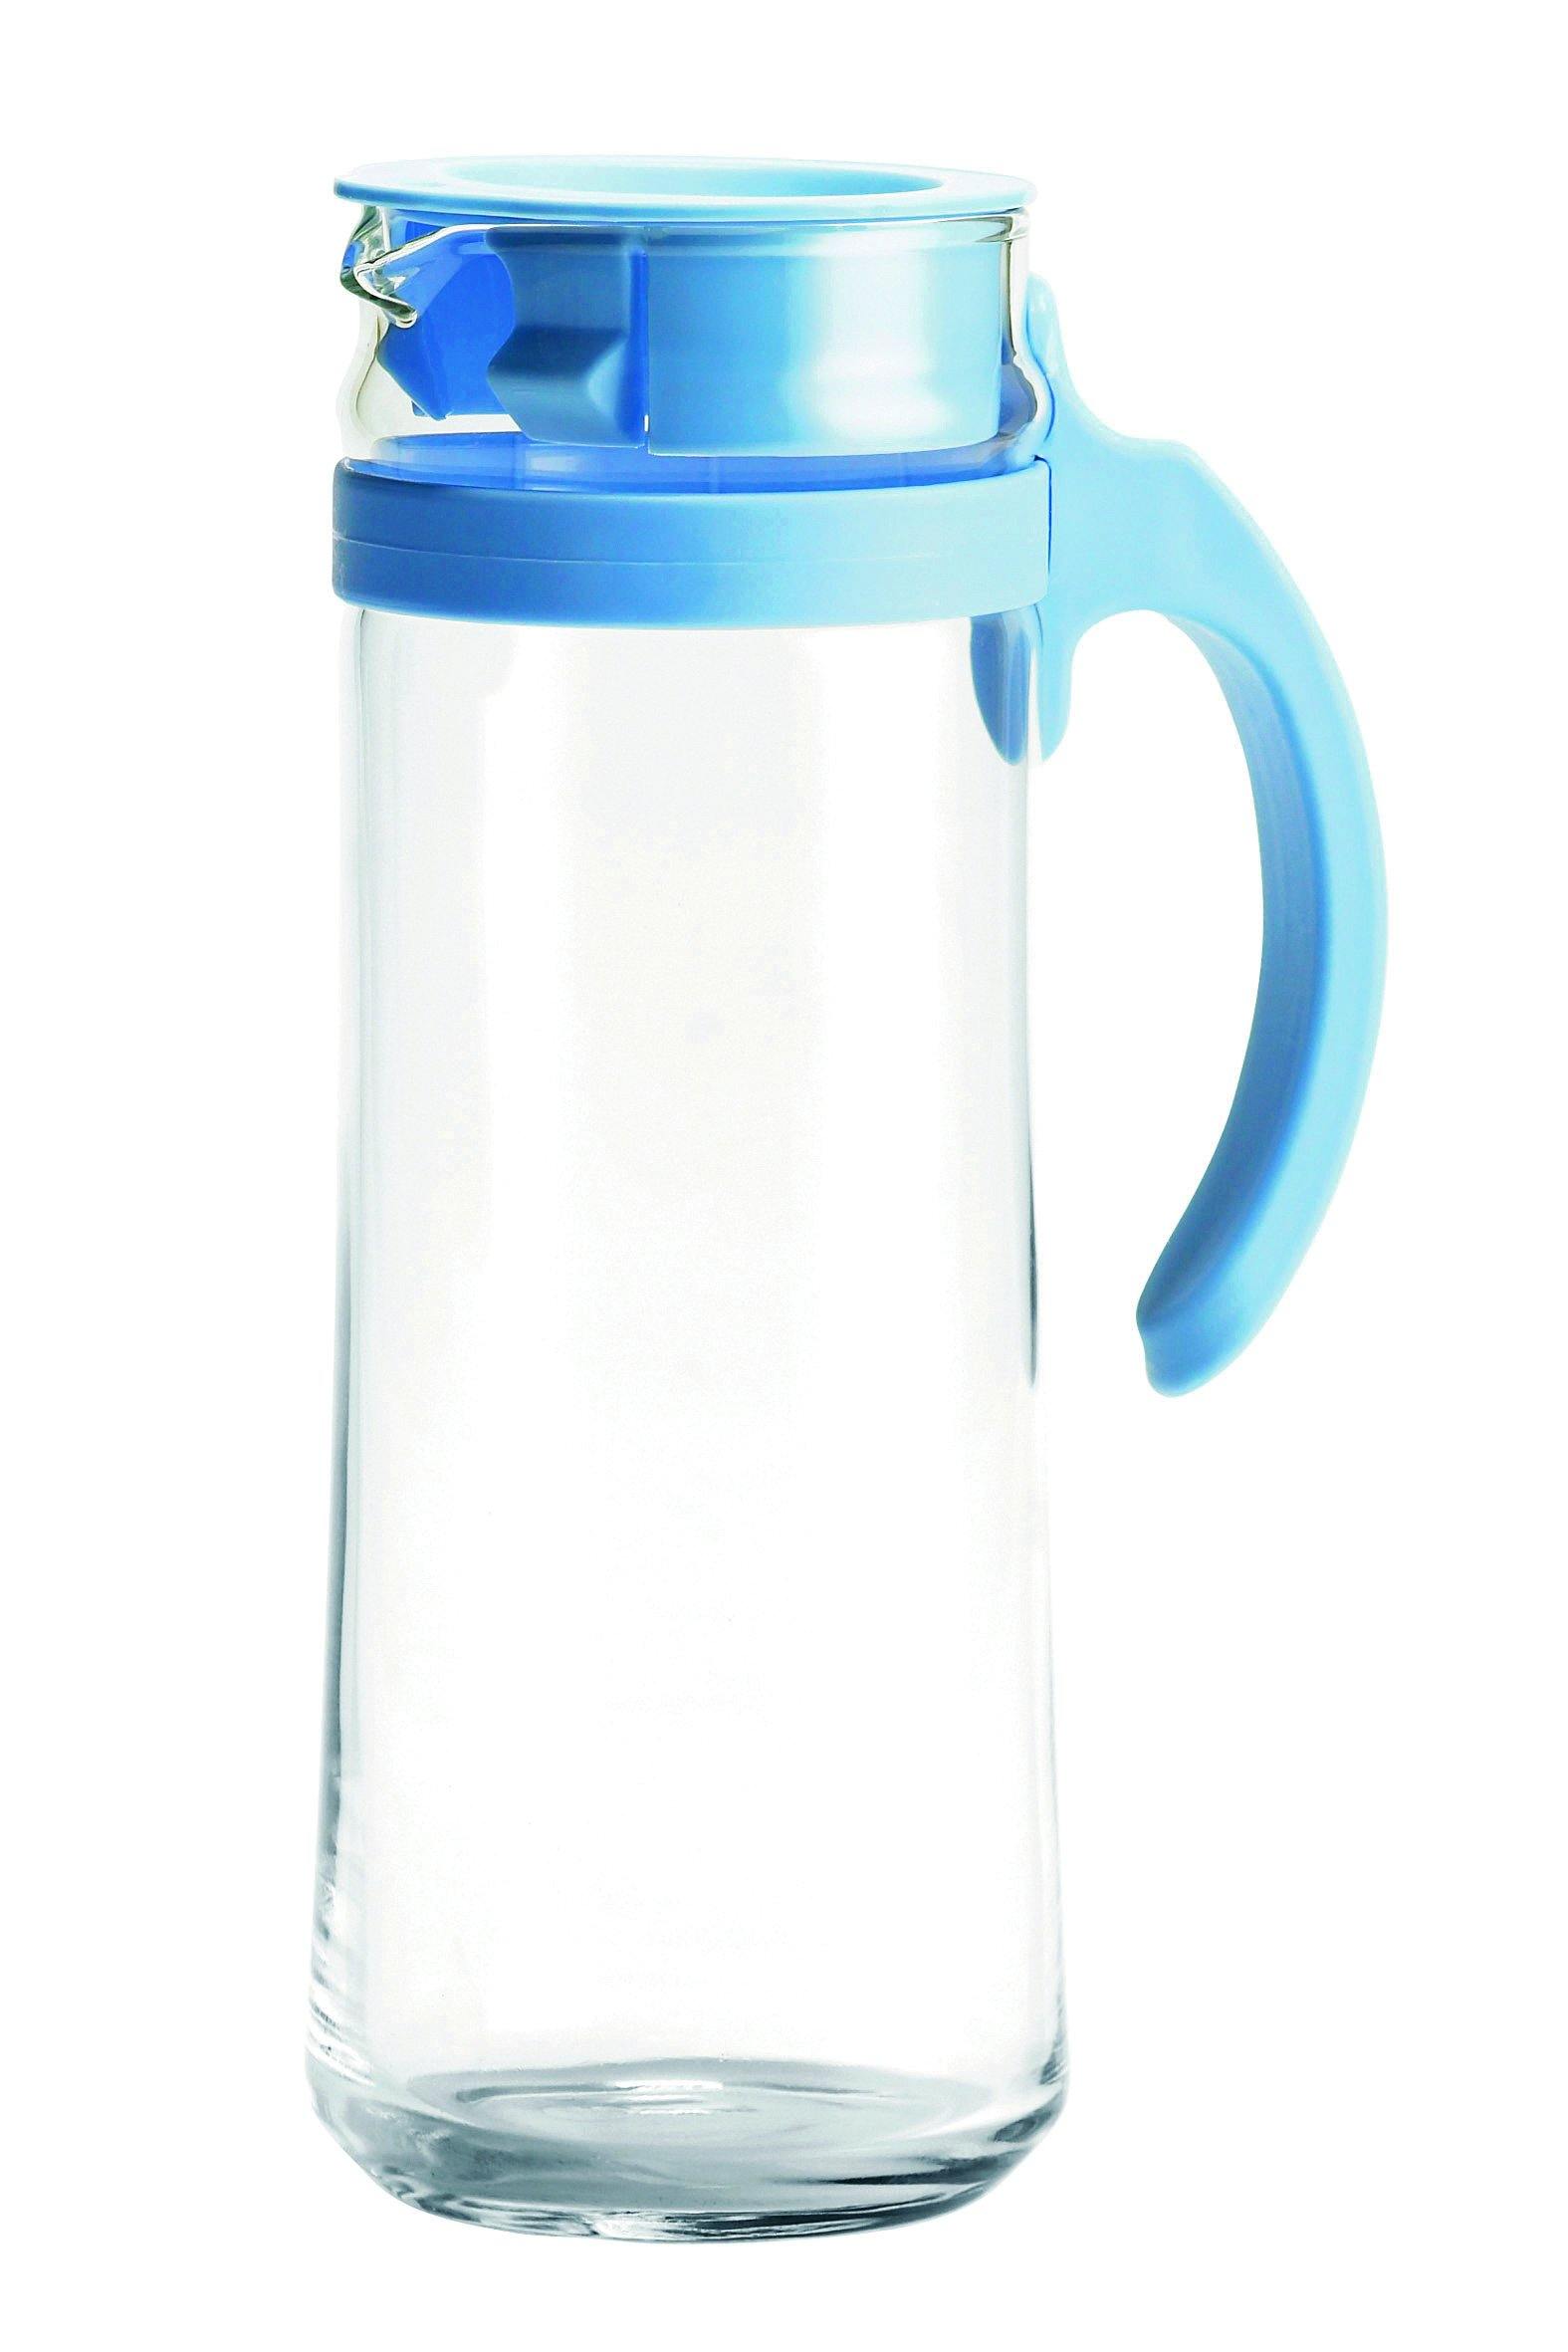 Ocean Patio Pitcher Blue, 1265 ml - Whole and All